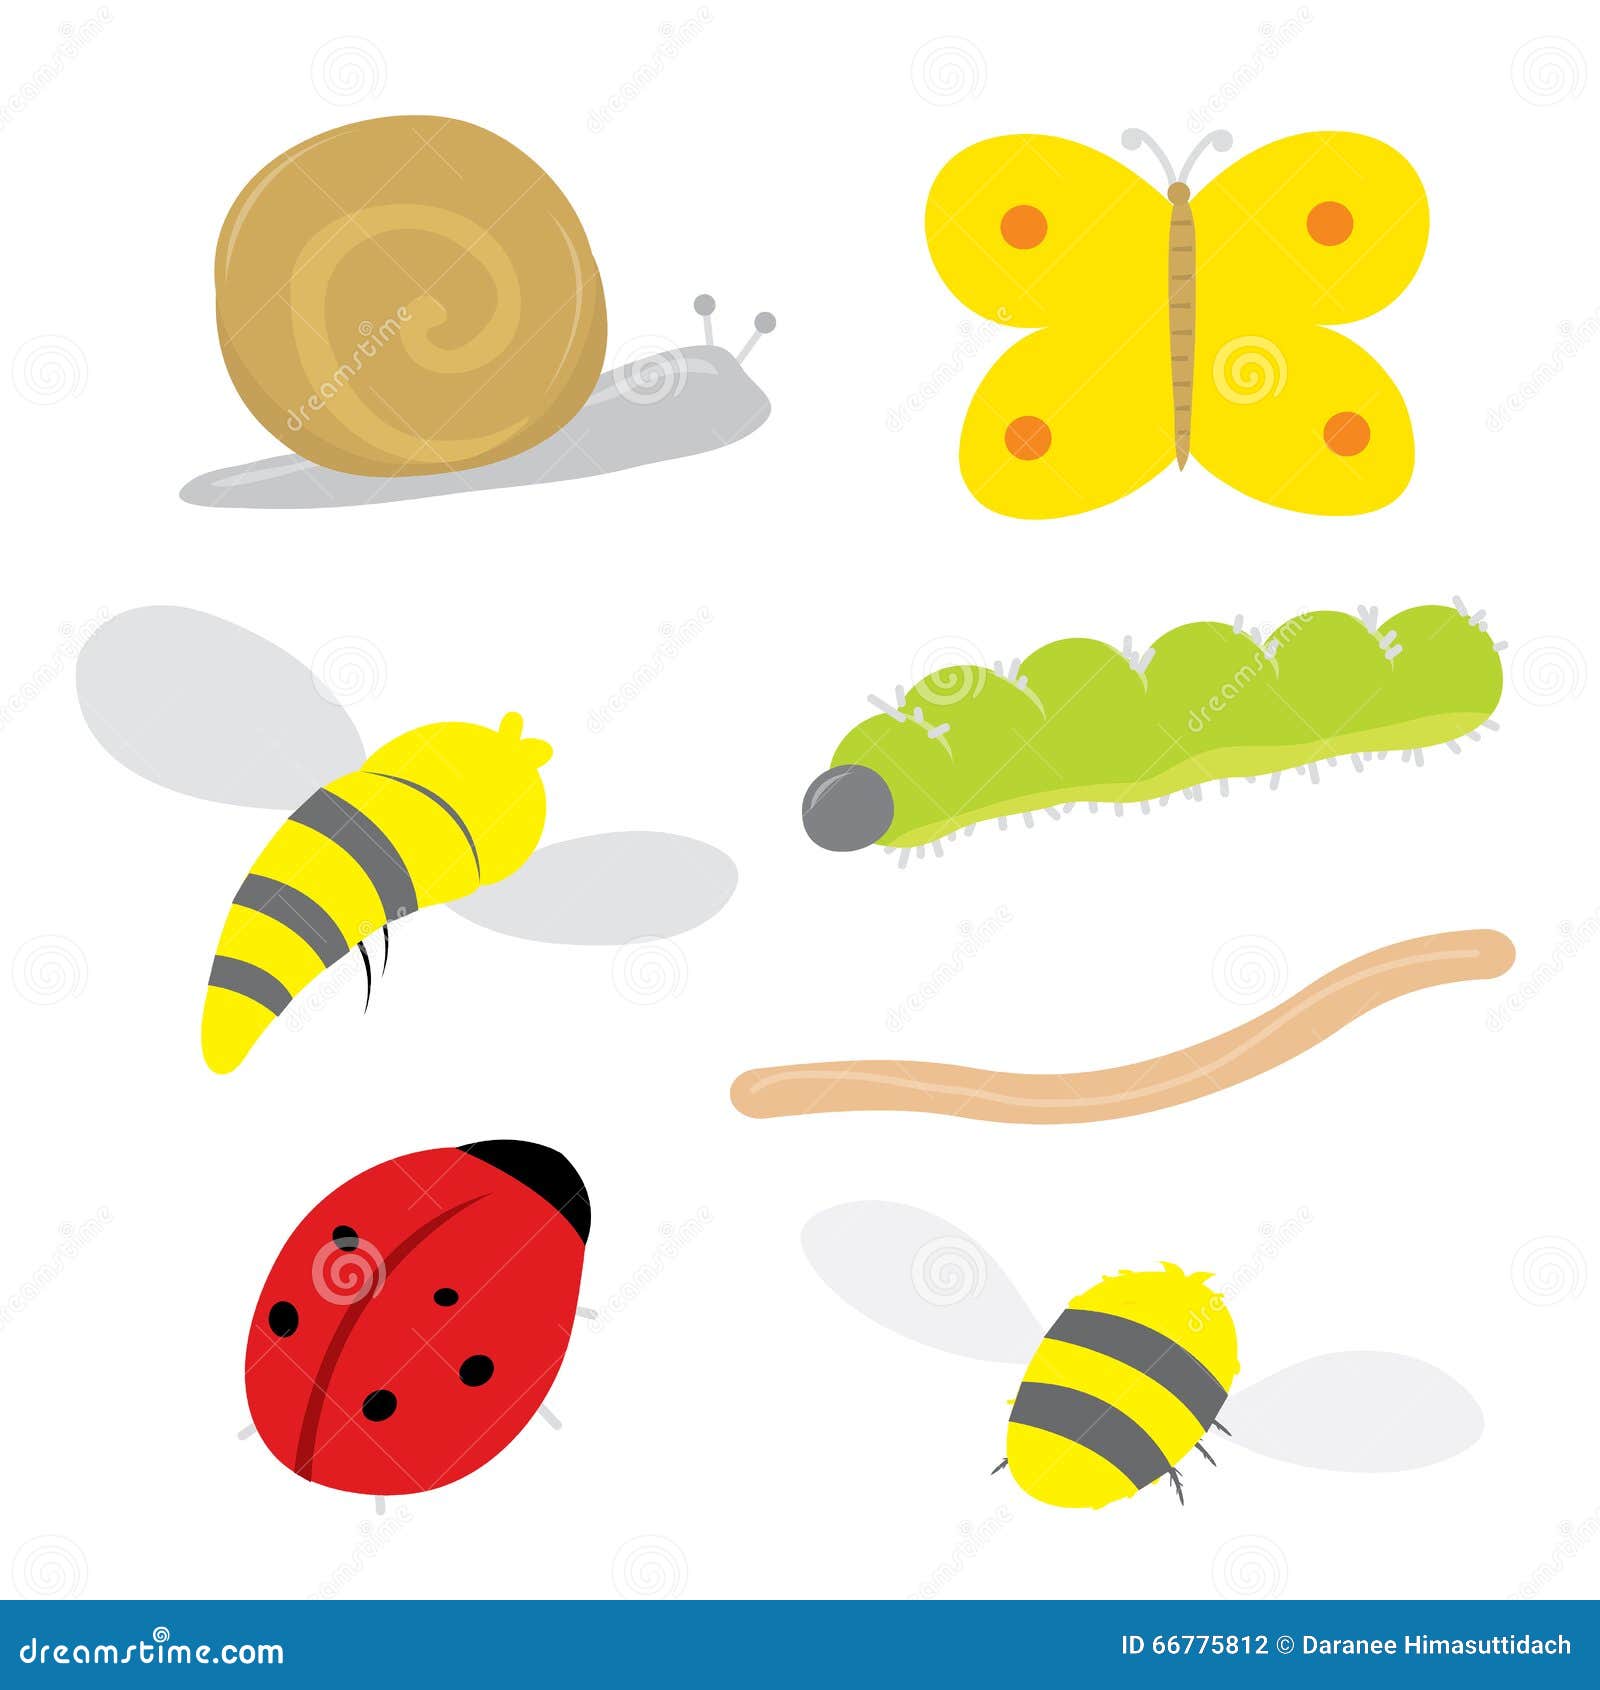 Insect Bug Snail Ladybird Butterfly Caterpillar Worm Wasp Bee Cartoon  Vector Stock Vector - Illustration of body, sting: 66775812